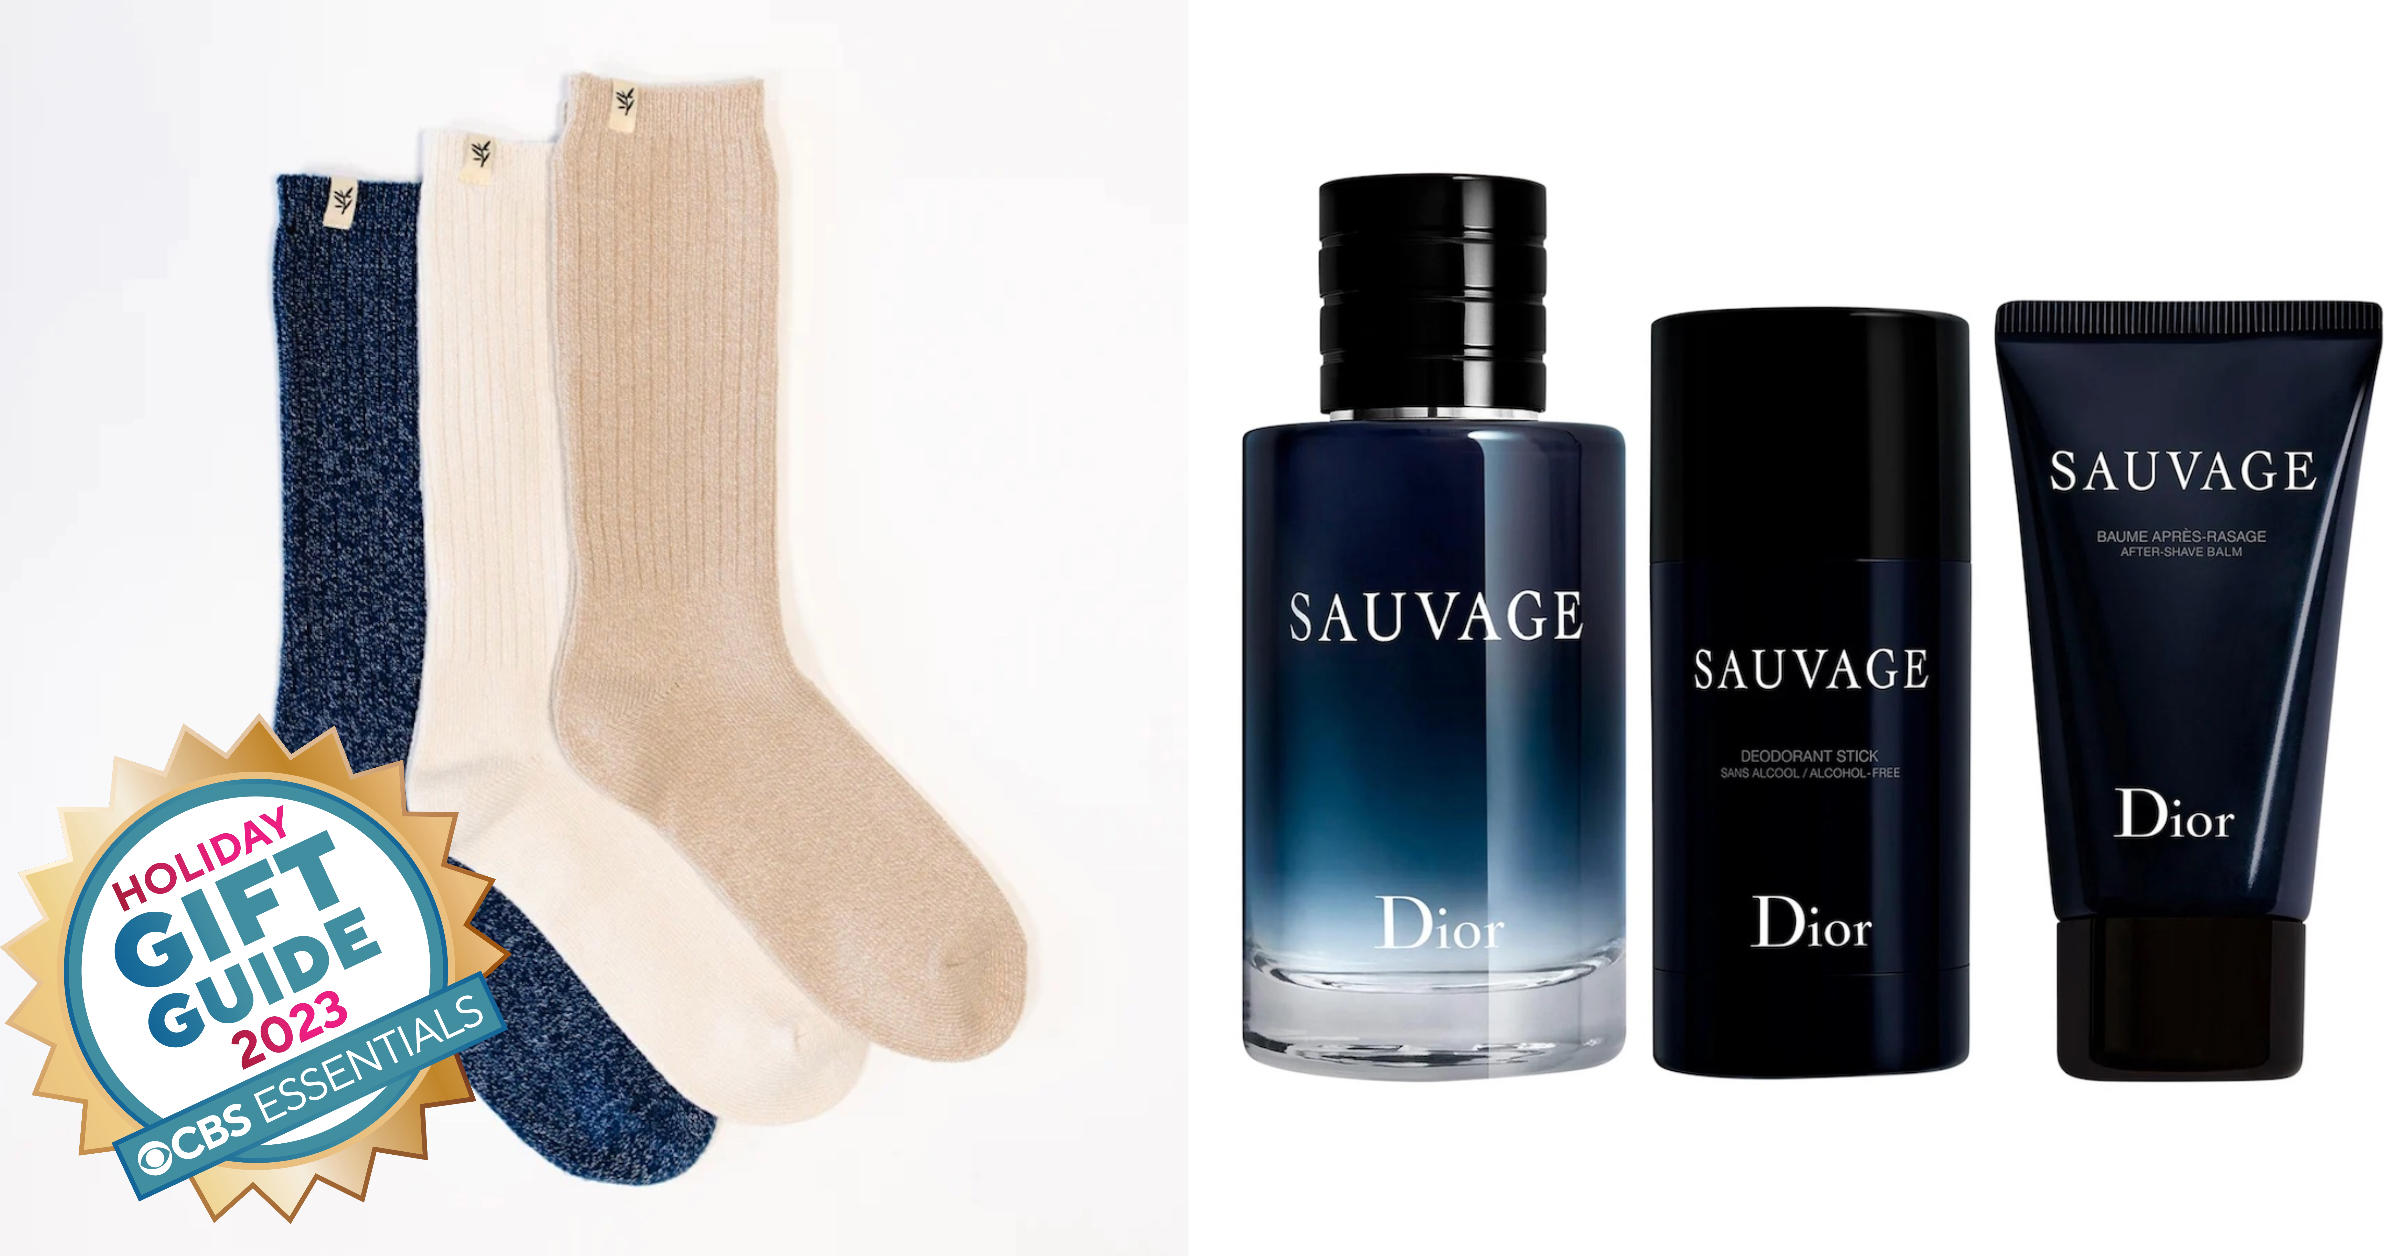 Stocking Stuffer Gift Guide for the Home Chef - Our Salty Kitchen